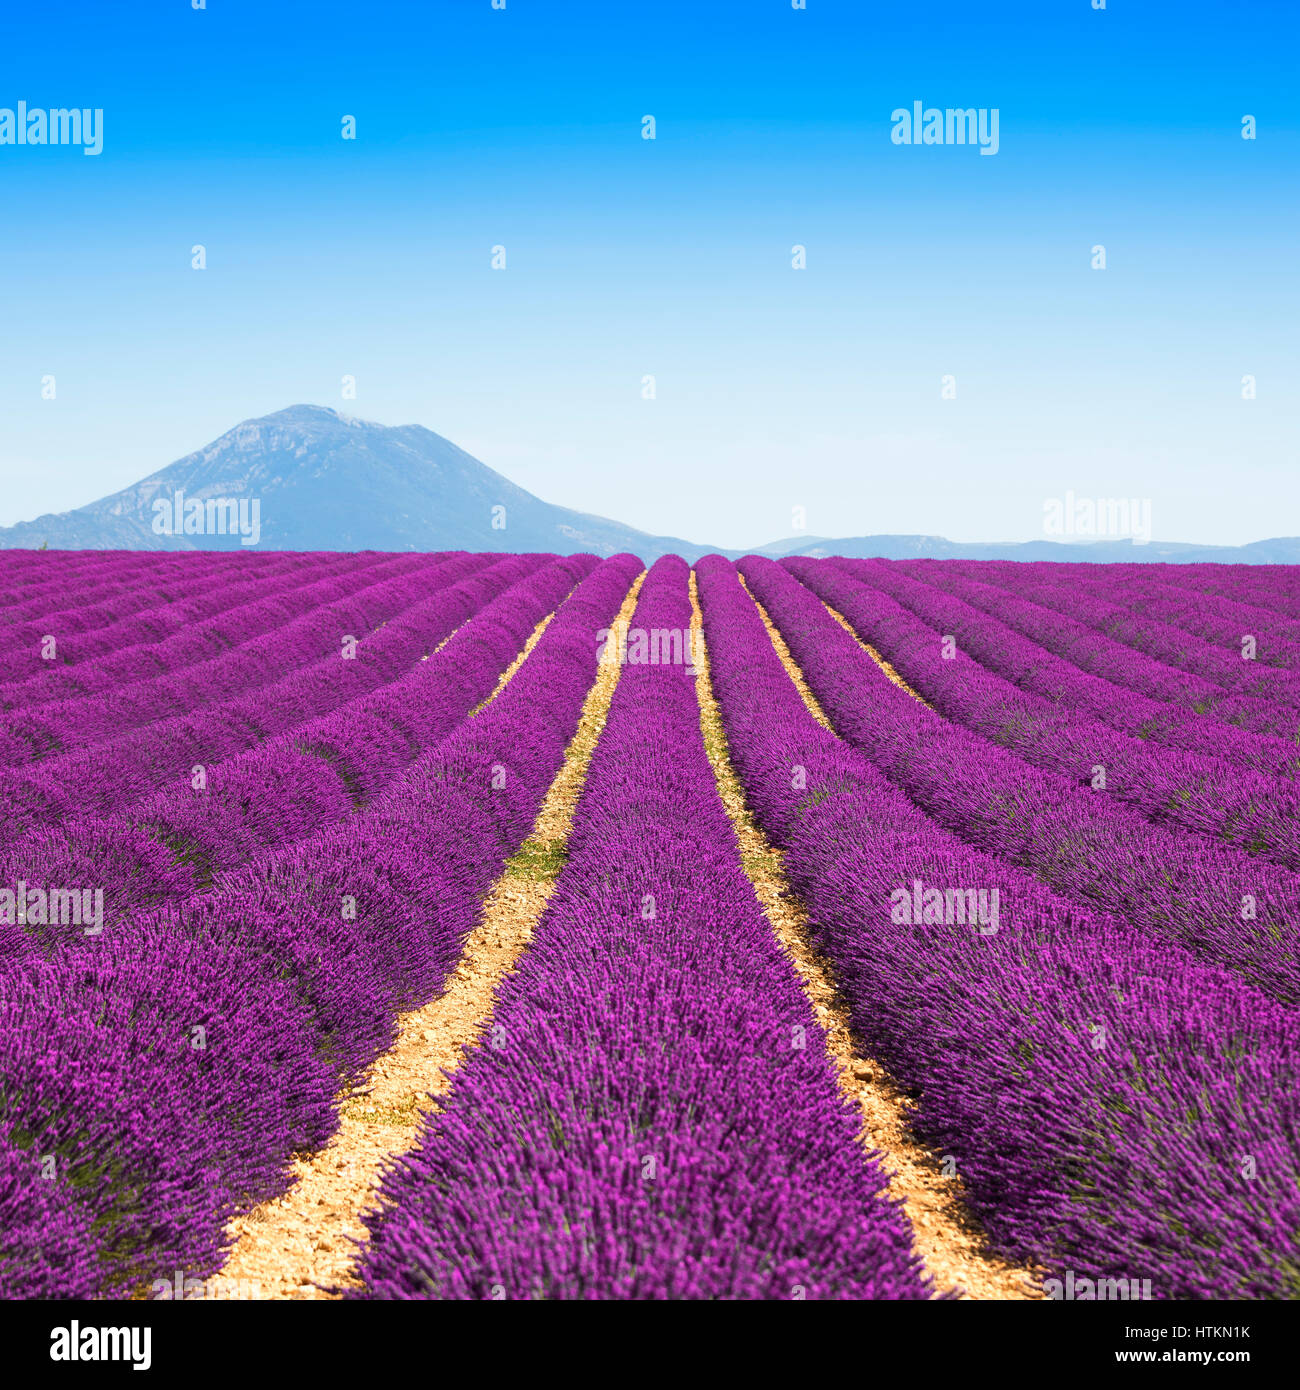 Lavender flower blooming scented fields in endless rows and mountain on background. Valensole plateau, provence, france, europe. Stock Photo